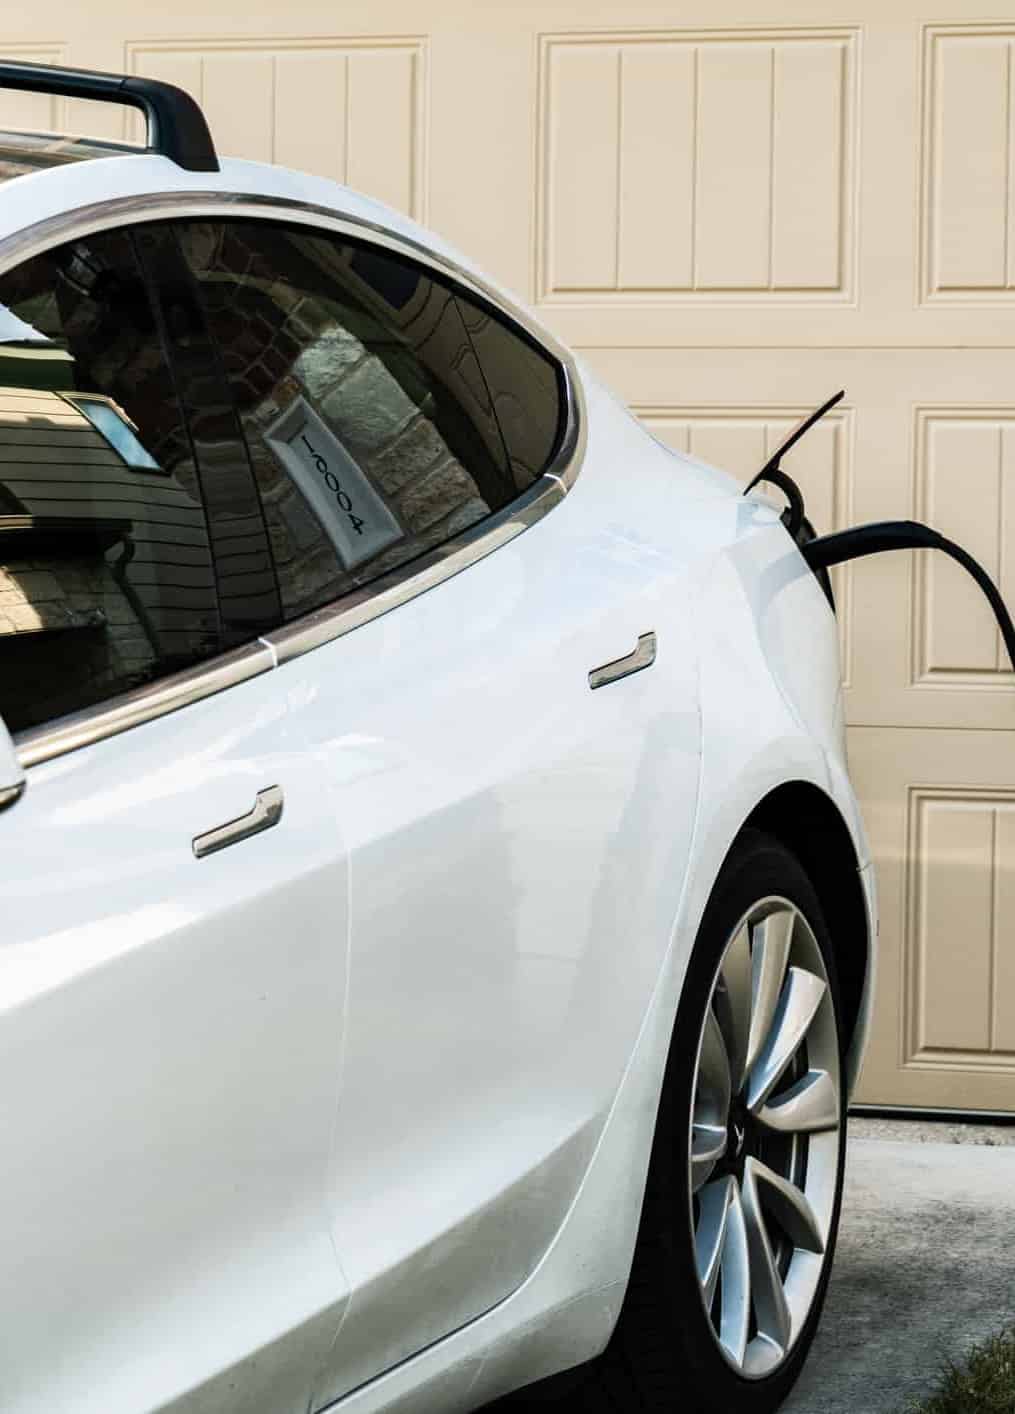 Charger installed for Electric Vehicle at home